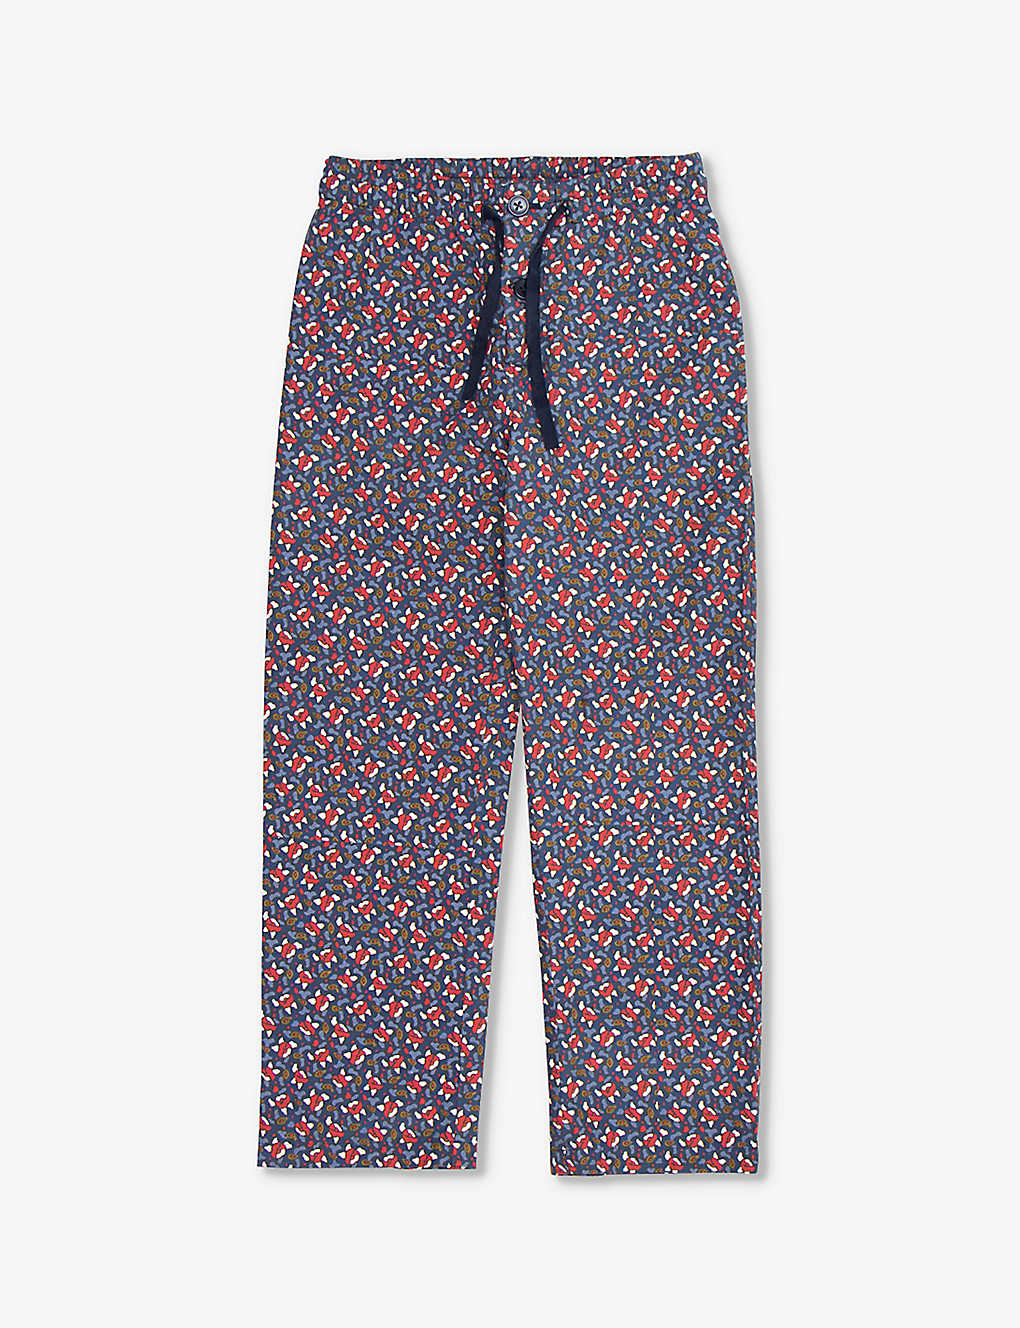 Caramel Girls Navy Seed Print Kids Ficus Floral-print Elasticated-waist Cotton Trousers 3-8 Years